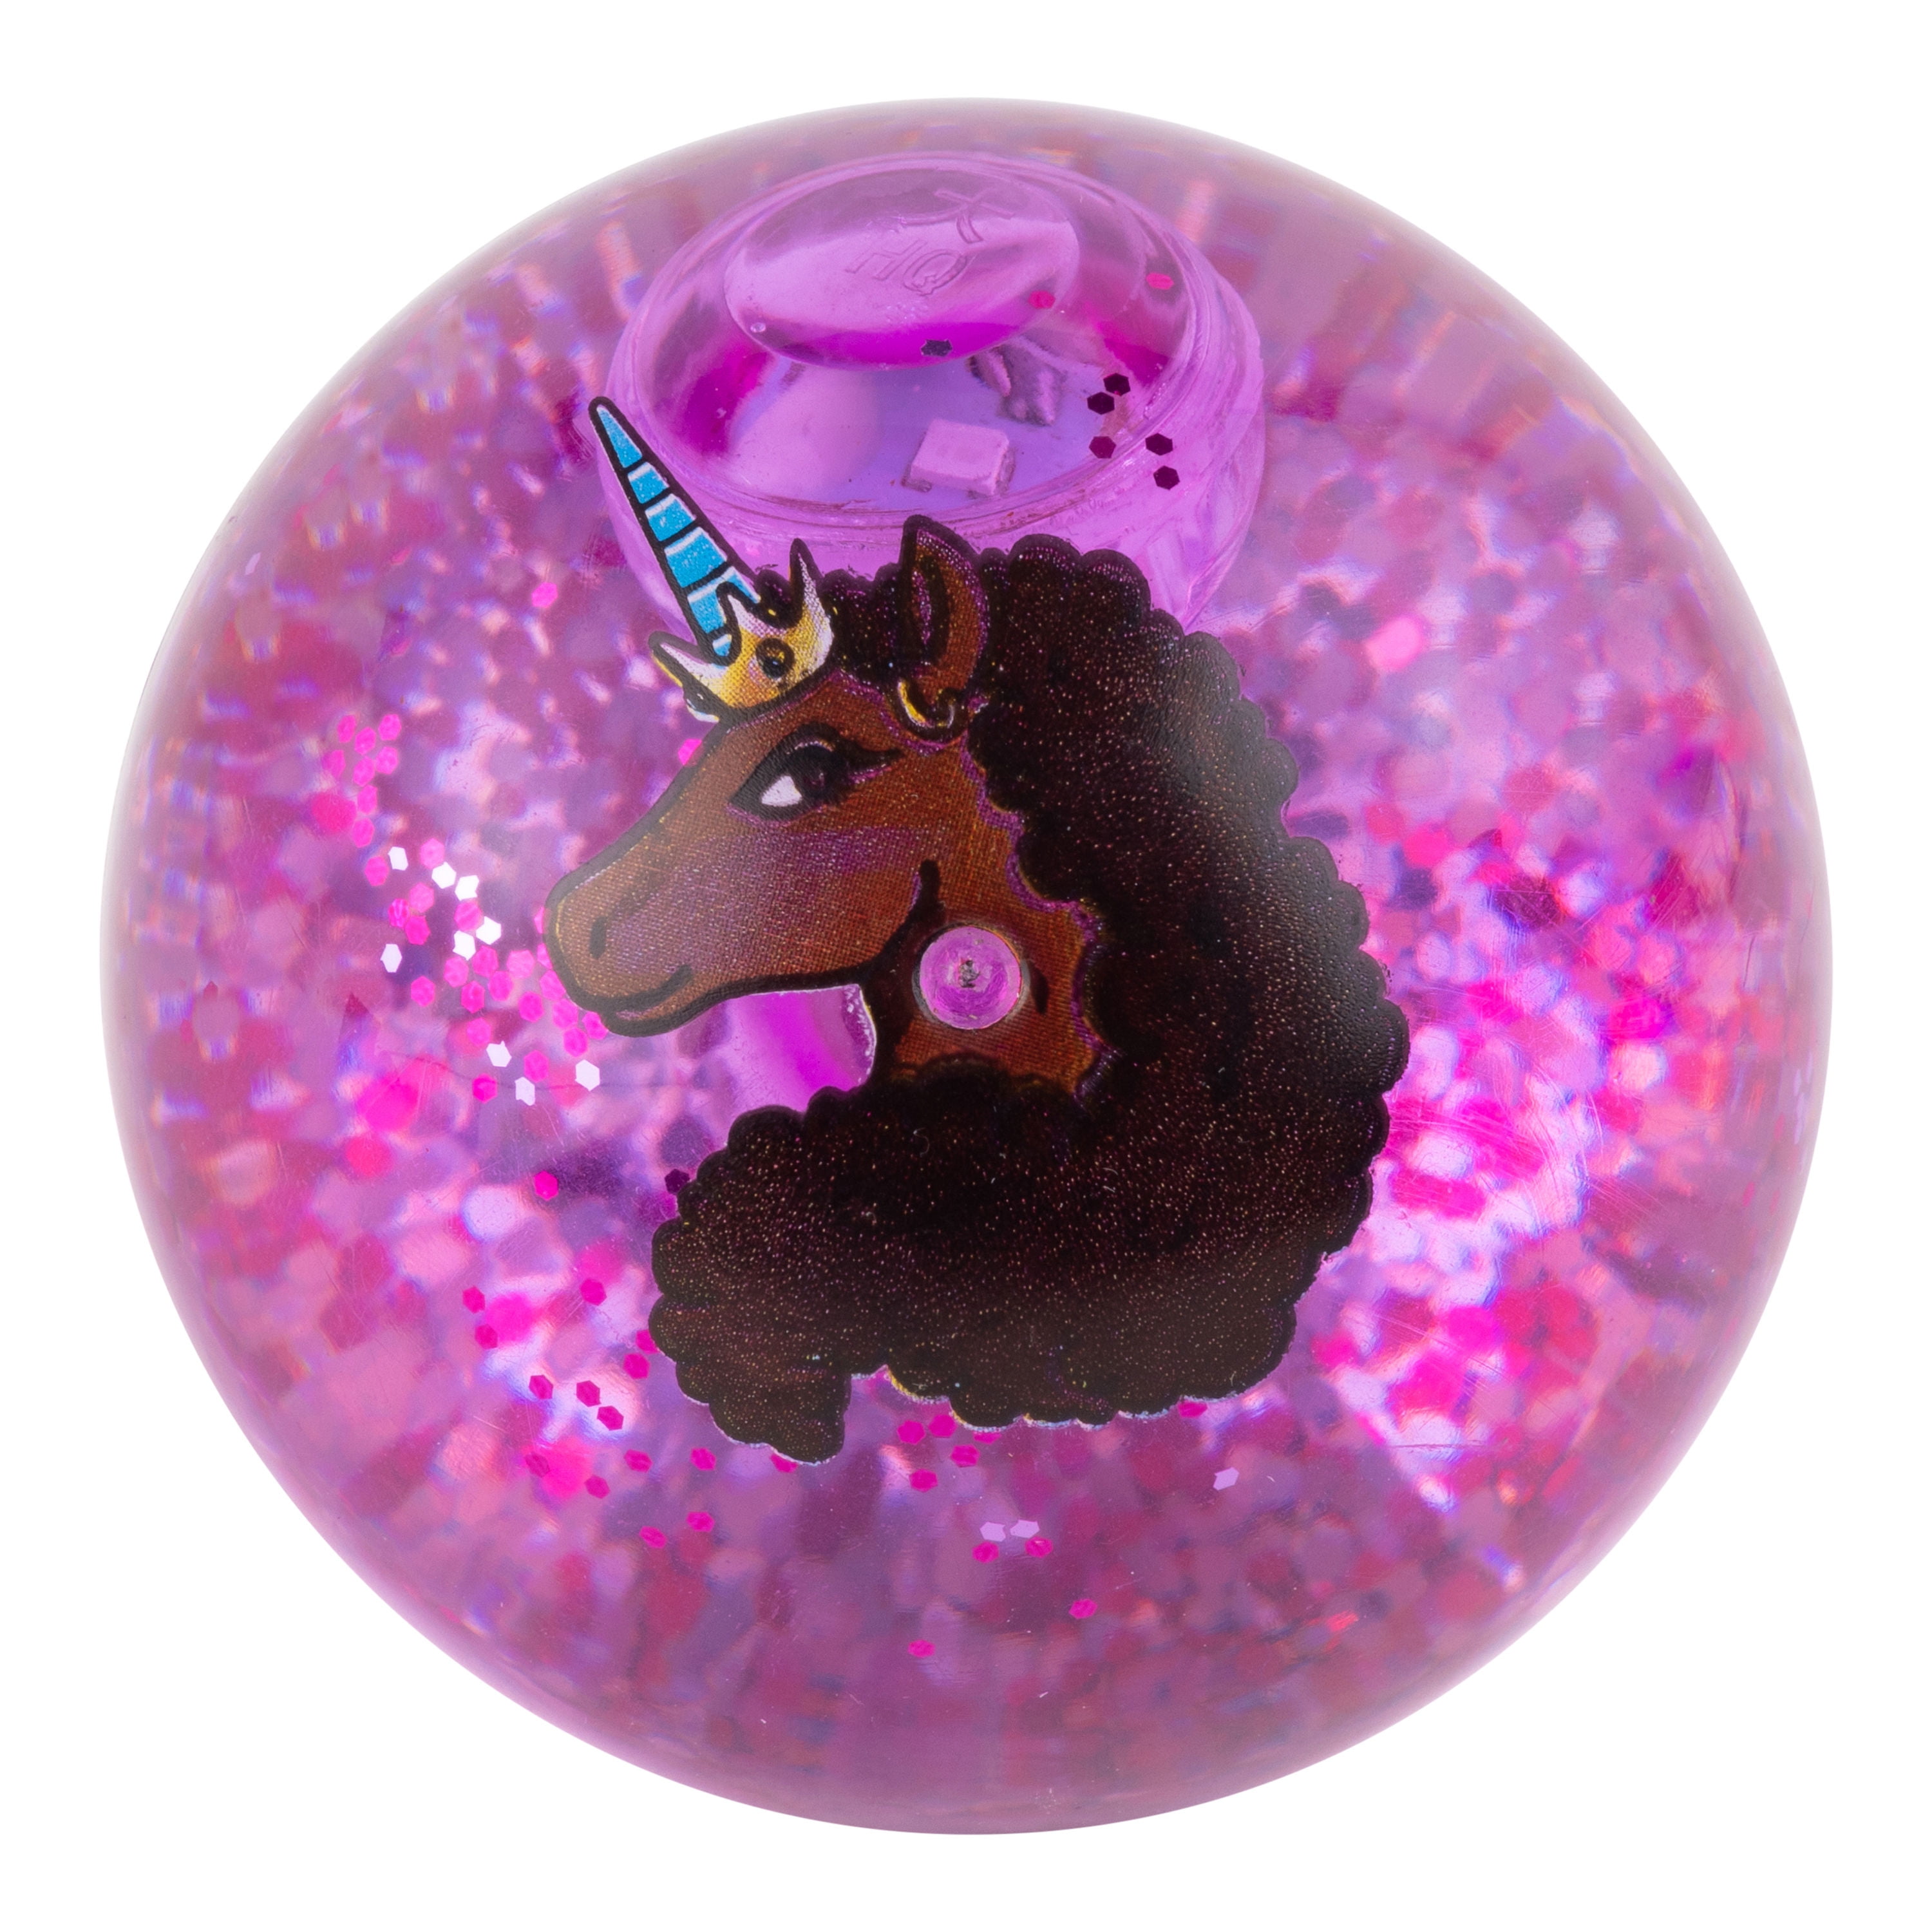 Afro Unicorn 3" Purple Light Up Water and Glitter Filled Bouncy Ball